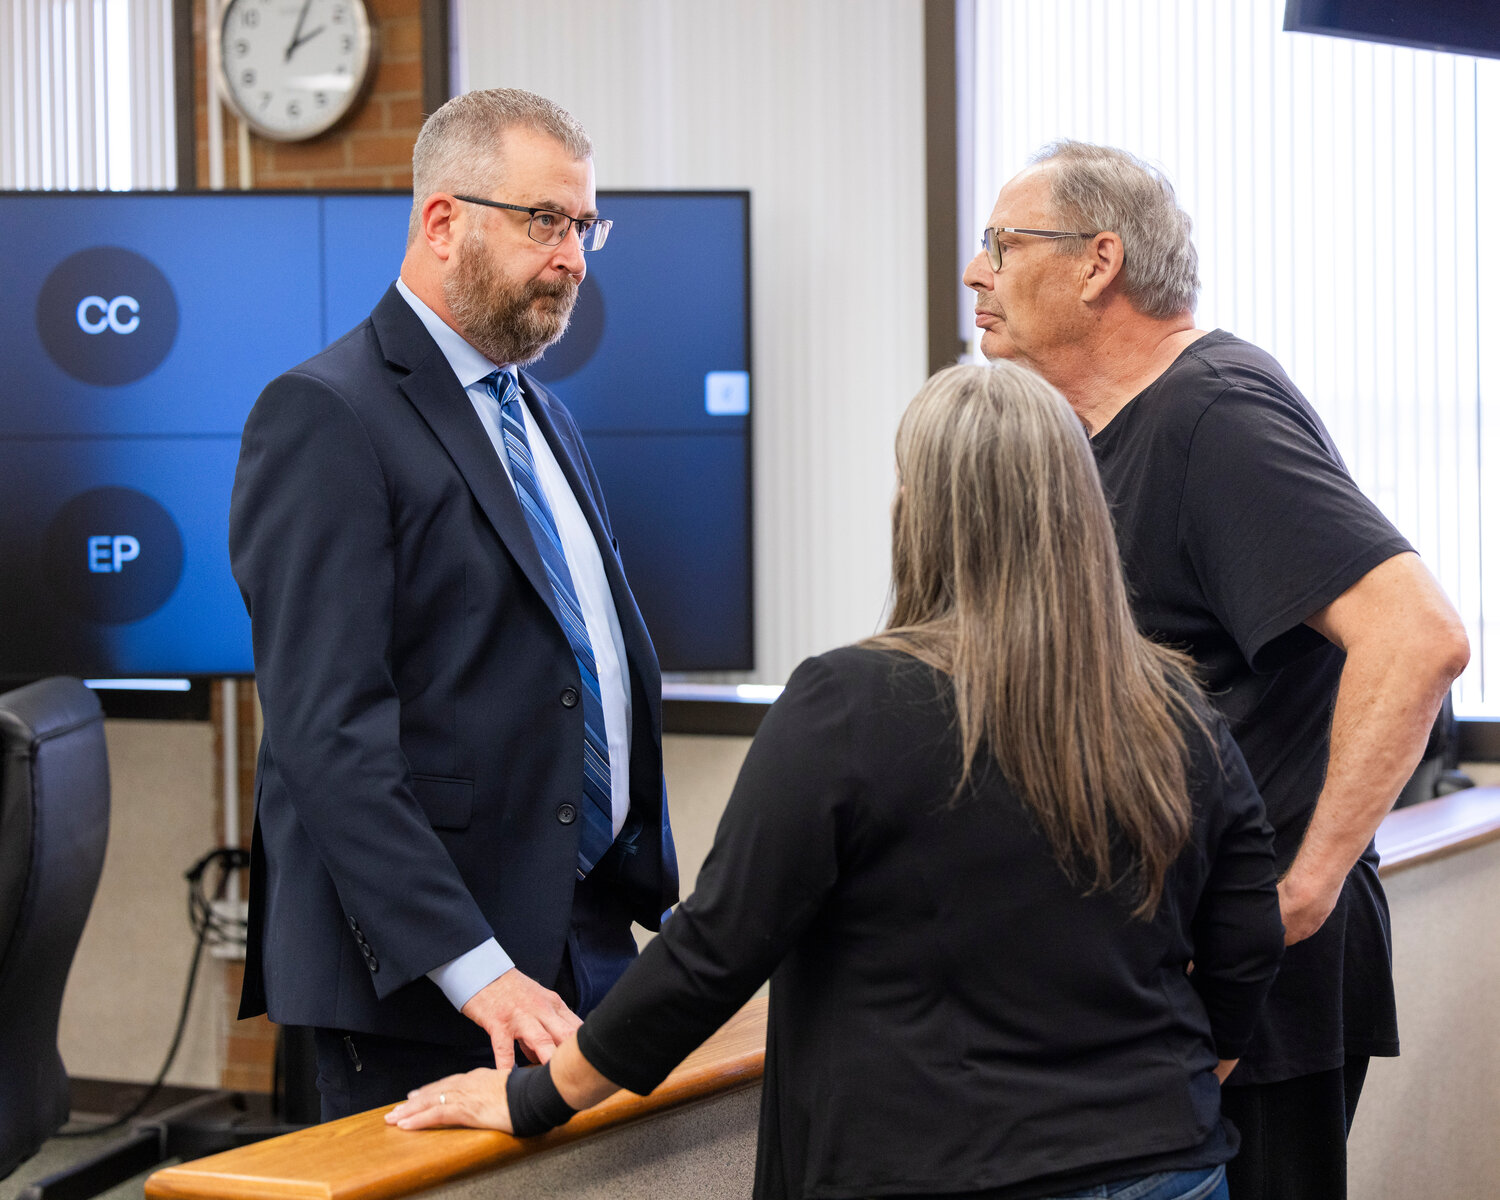 Prosecutors react and talk to attendees about a verdict in Lewis County Superior Court following a bench trial in Chehalis on Friday, July 28.